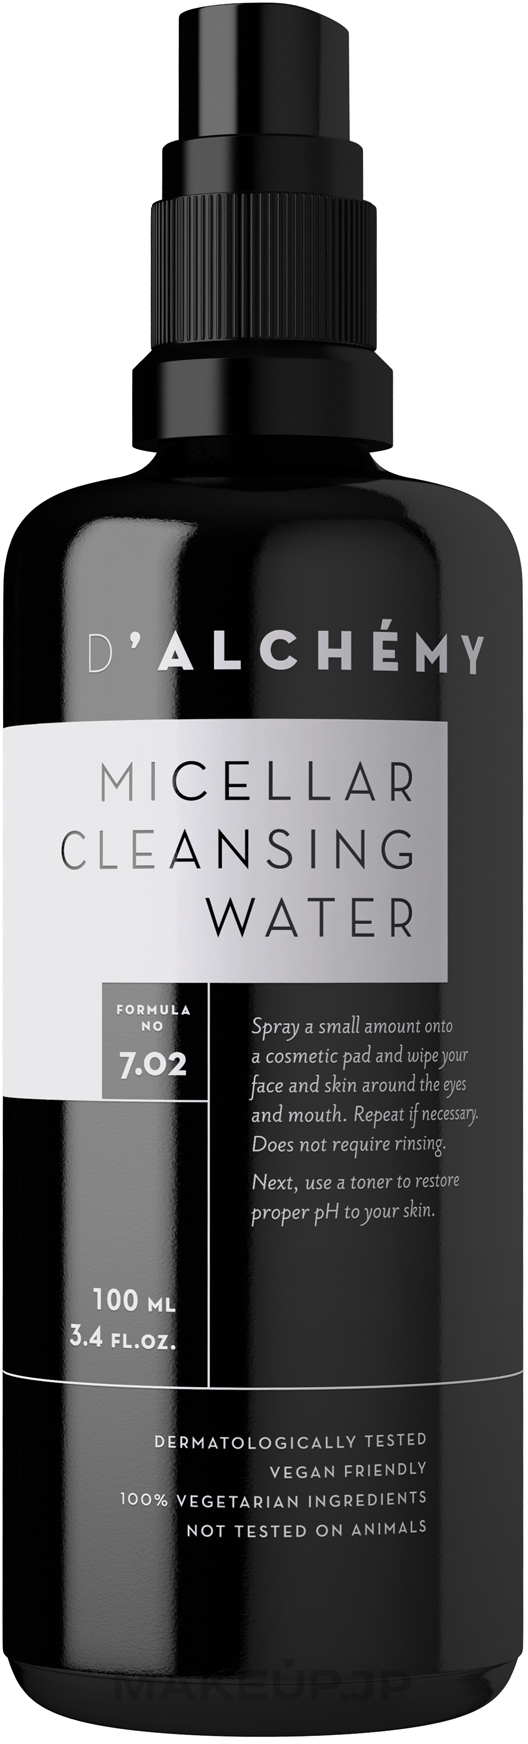 Makeup Removing Micellar Gel - D'Alchemy Micellar Cleansing Water — photo 100 ml